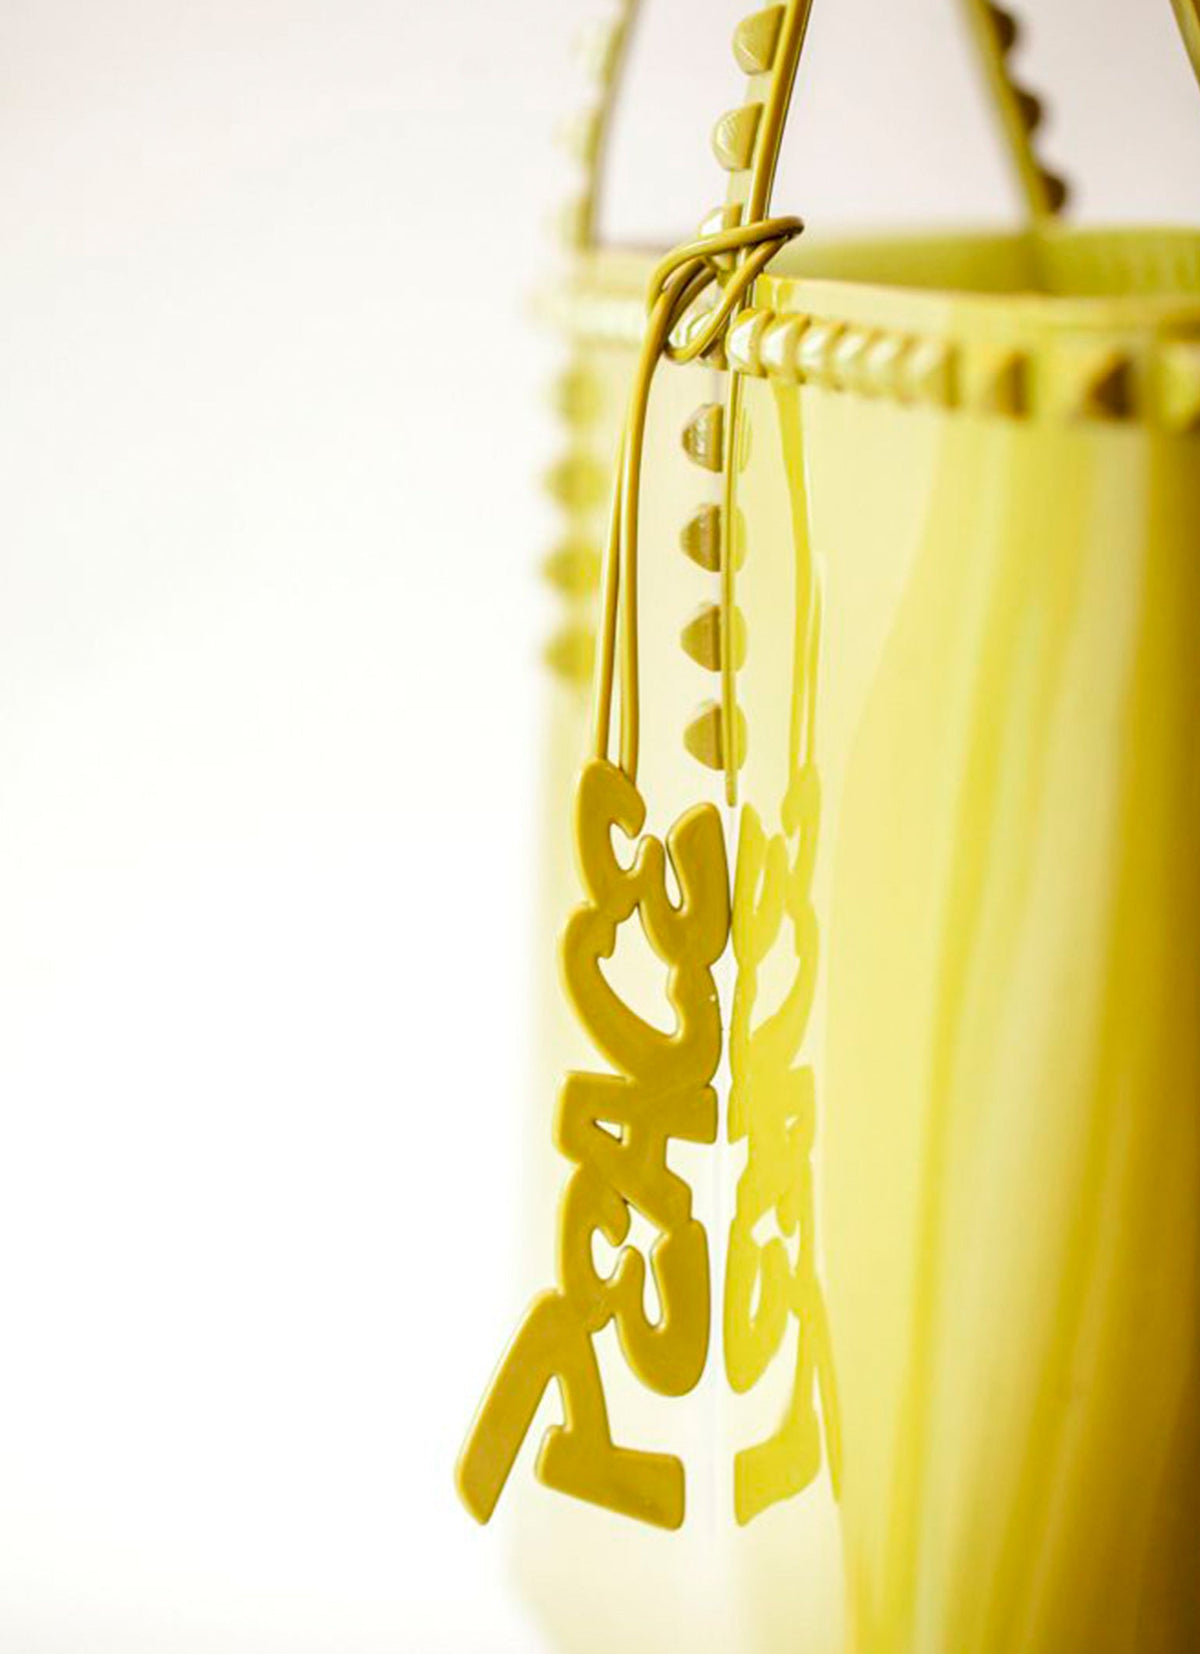 Made in Italy peace jelly bag charms on sale in color yellow